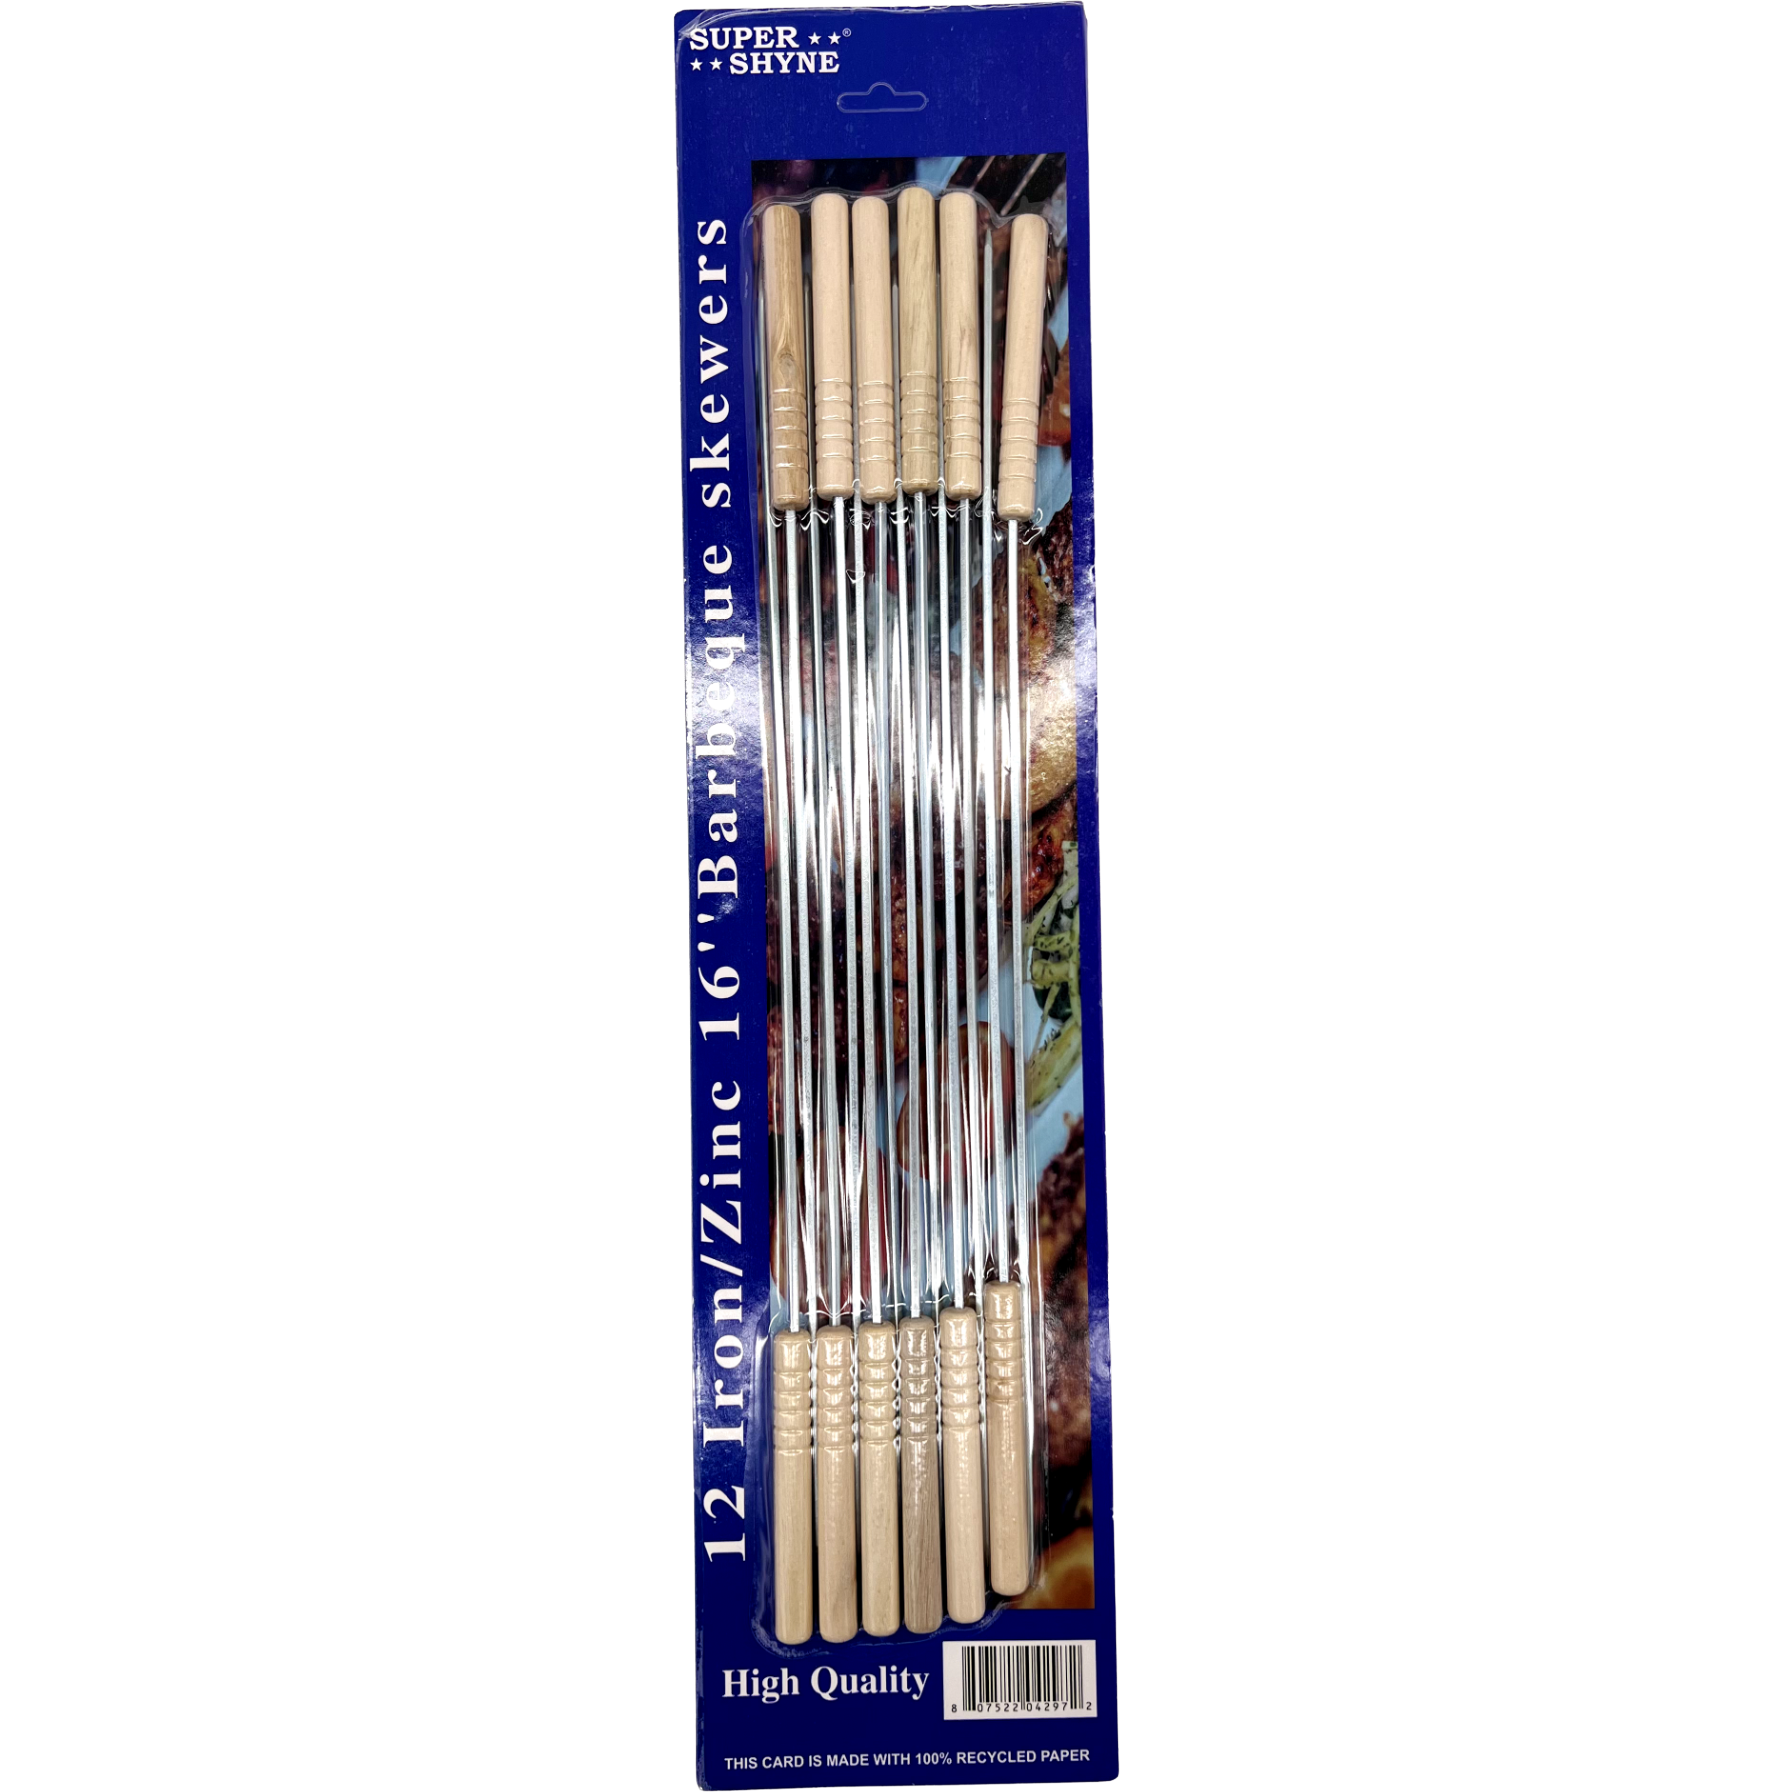 Case of 1 - Super Shyne Barbeque Skewers - 12 Ct